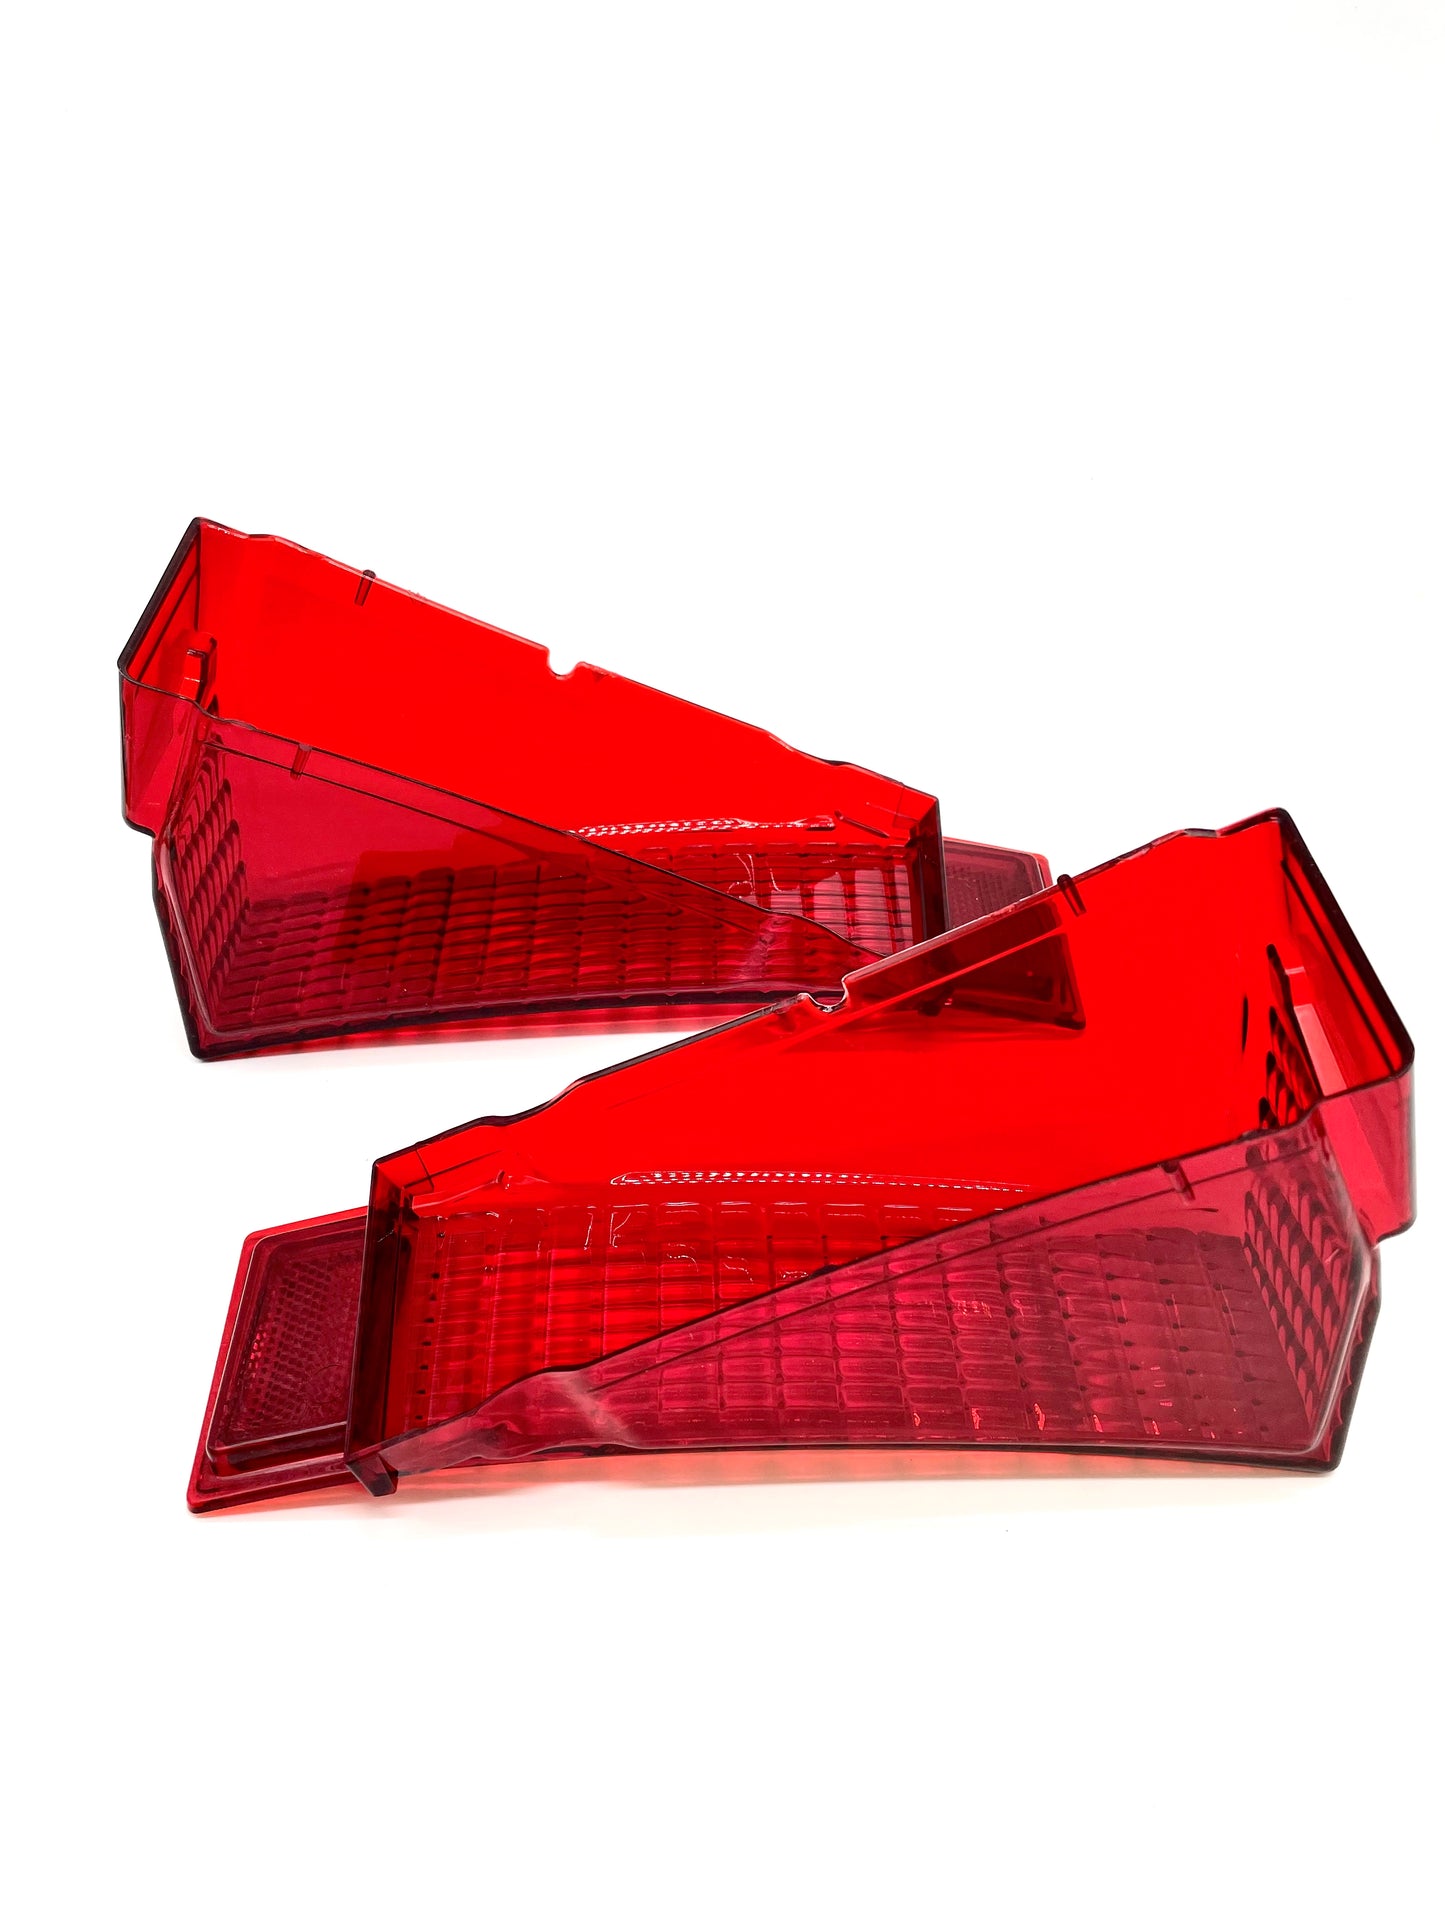 1968 Chevelle Taillight Lens, Sold in pairs